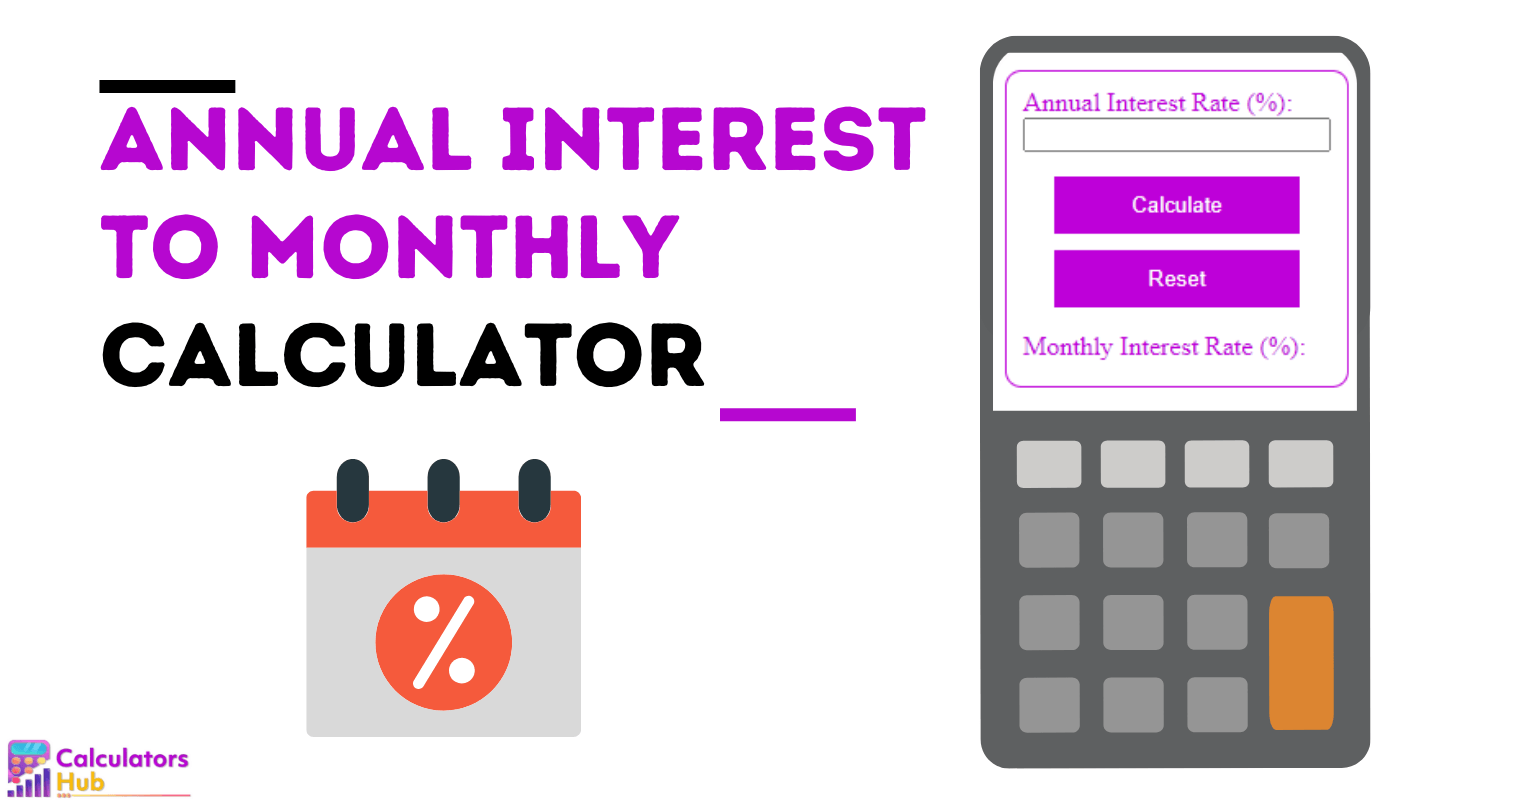 Annual Interest To Monthly Calculator